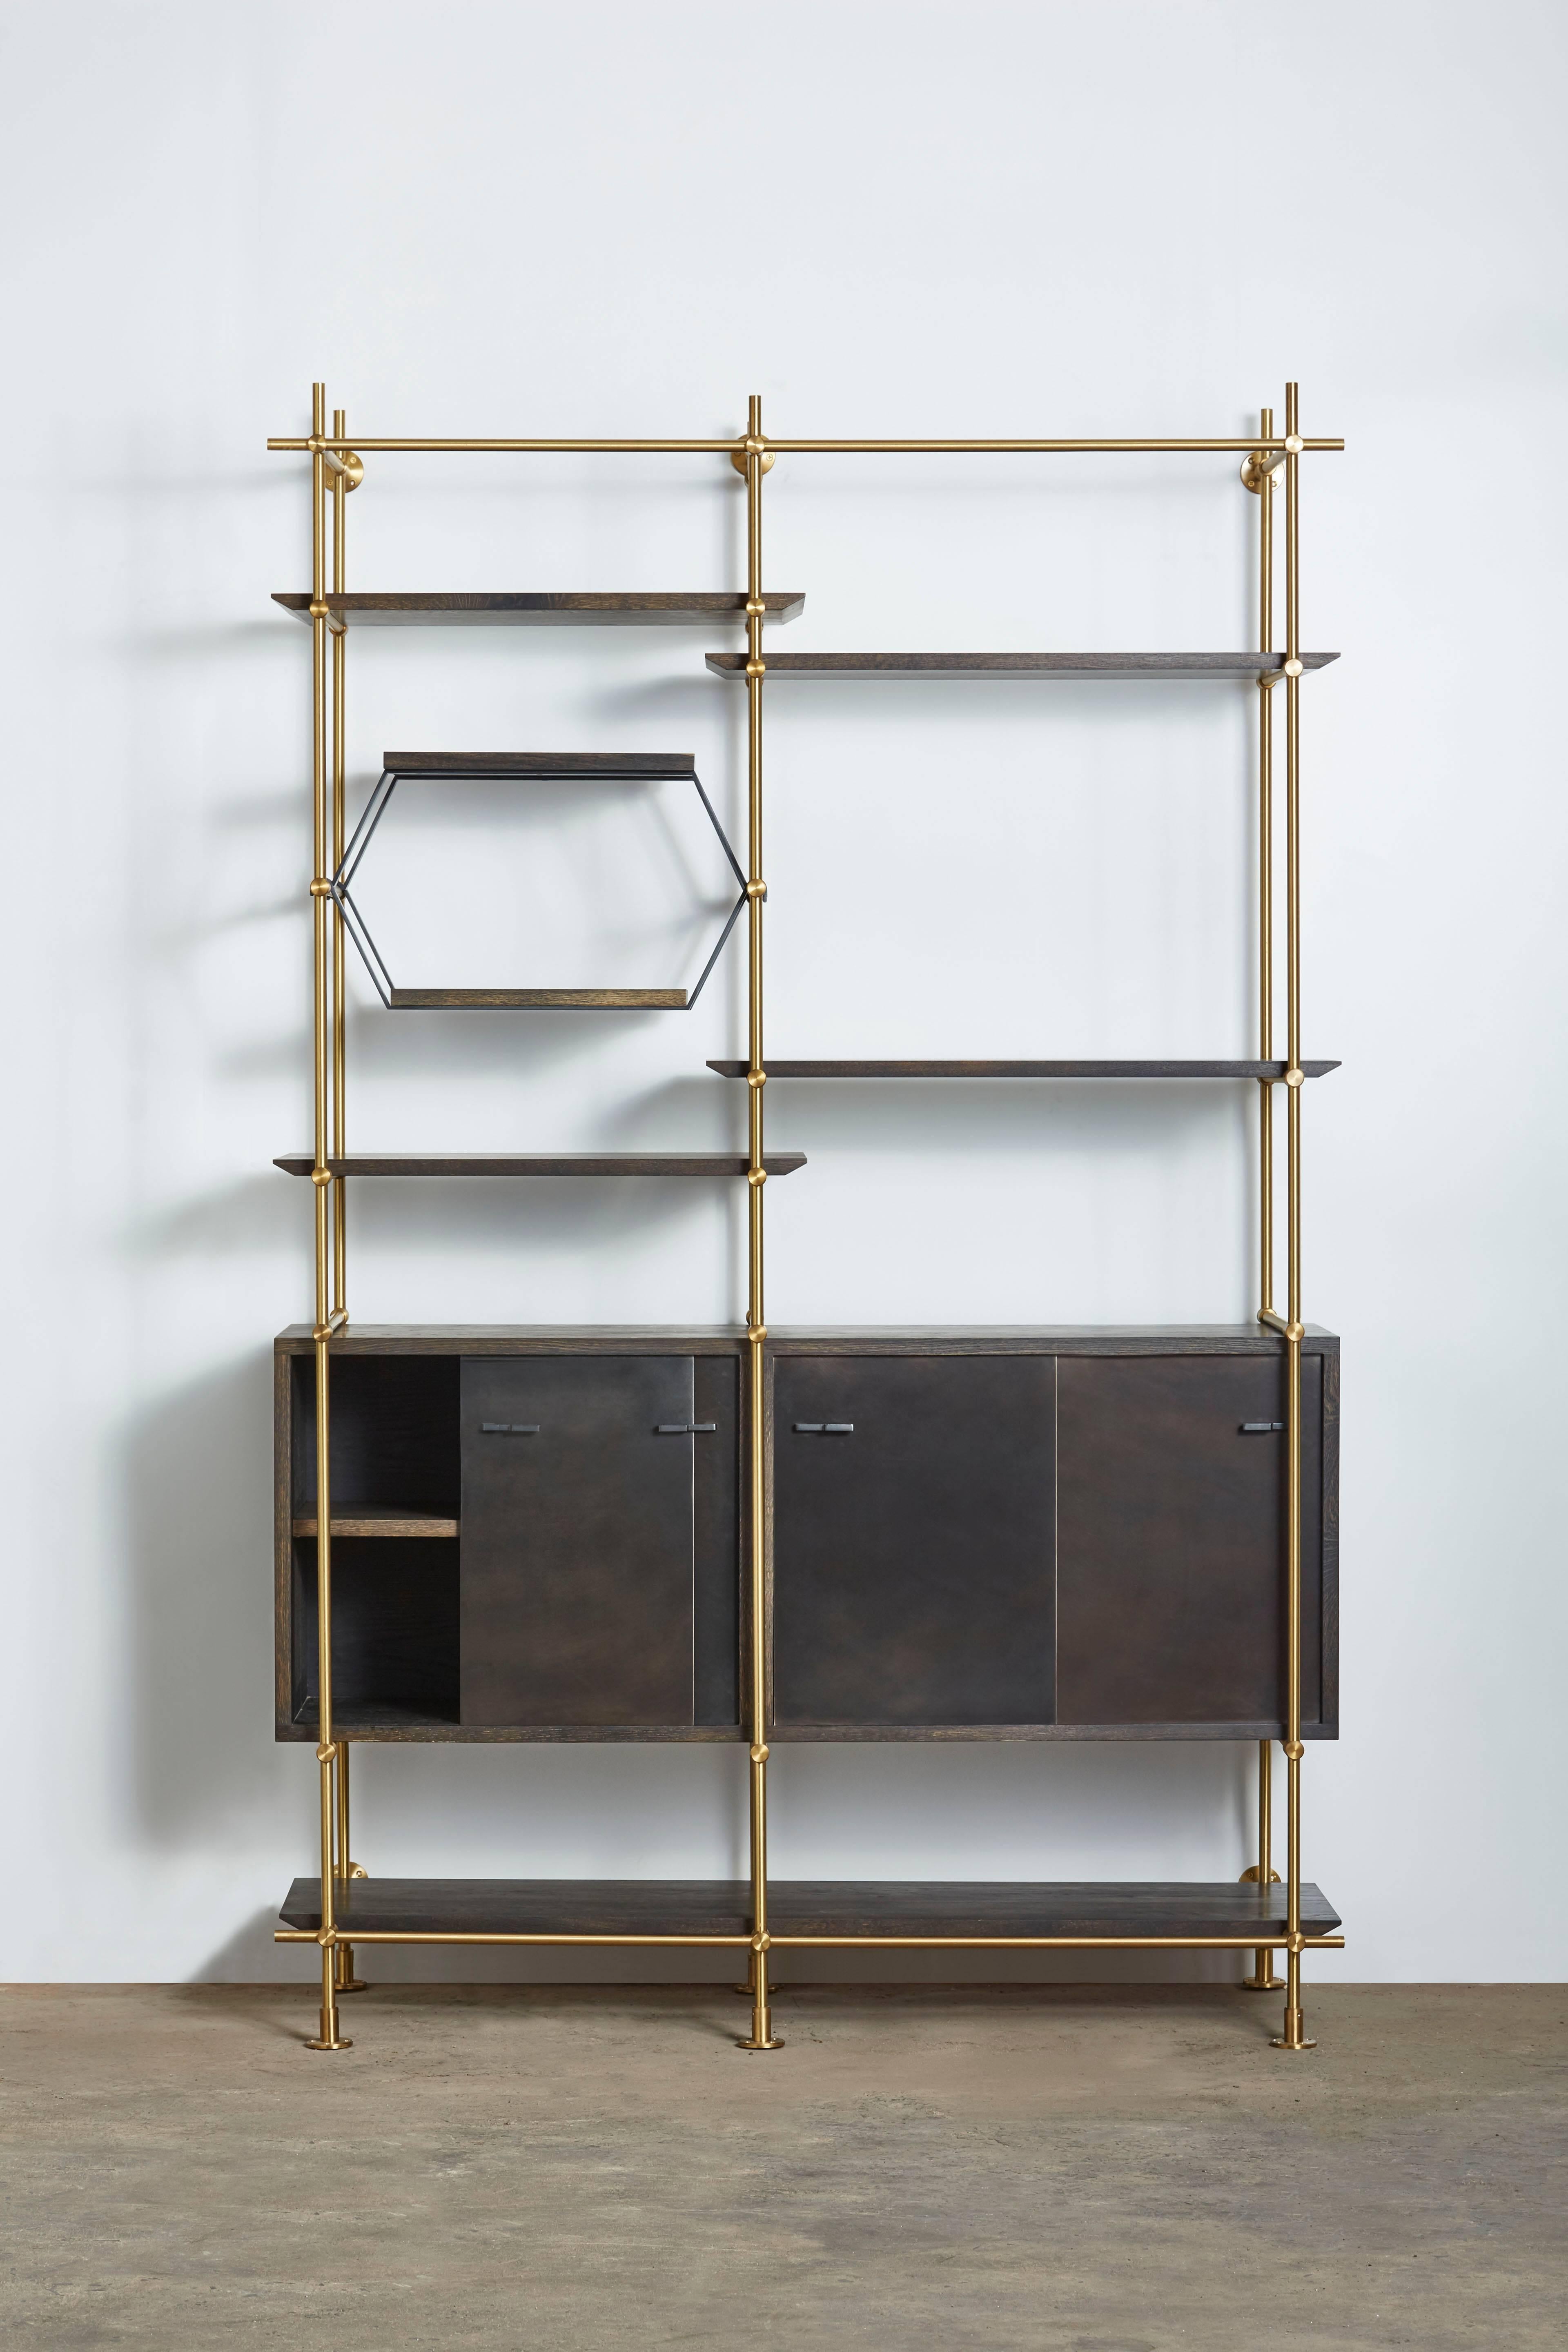 This two bay version of Amuneal’s collector’s shelving unit features solid machined brass fittings and posts in a warm brass finish. The unit mounts to the floor and to the wall to support a series of easily adjustable shelves and credenza cabinet